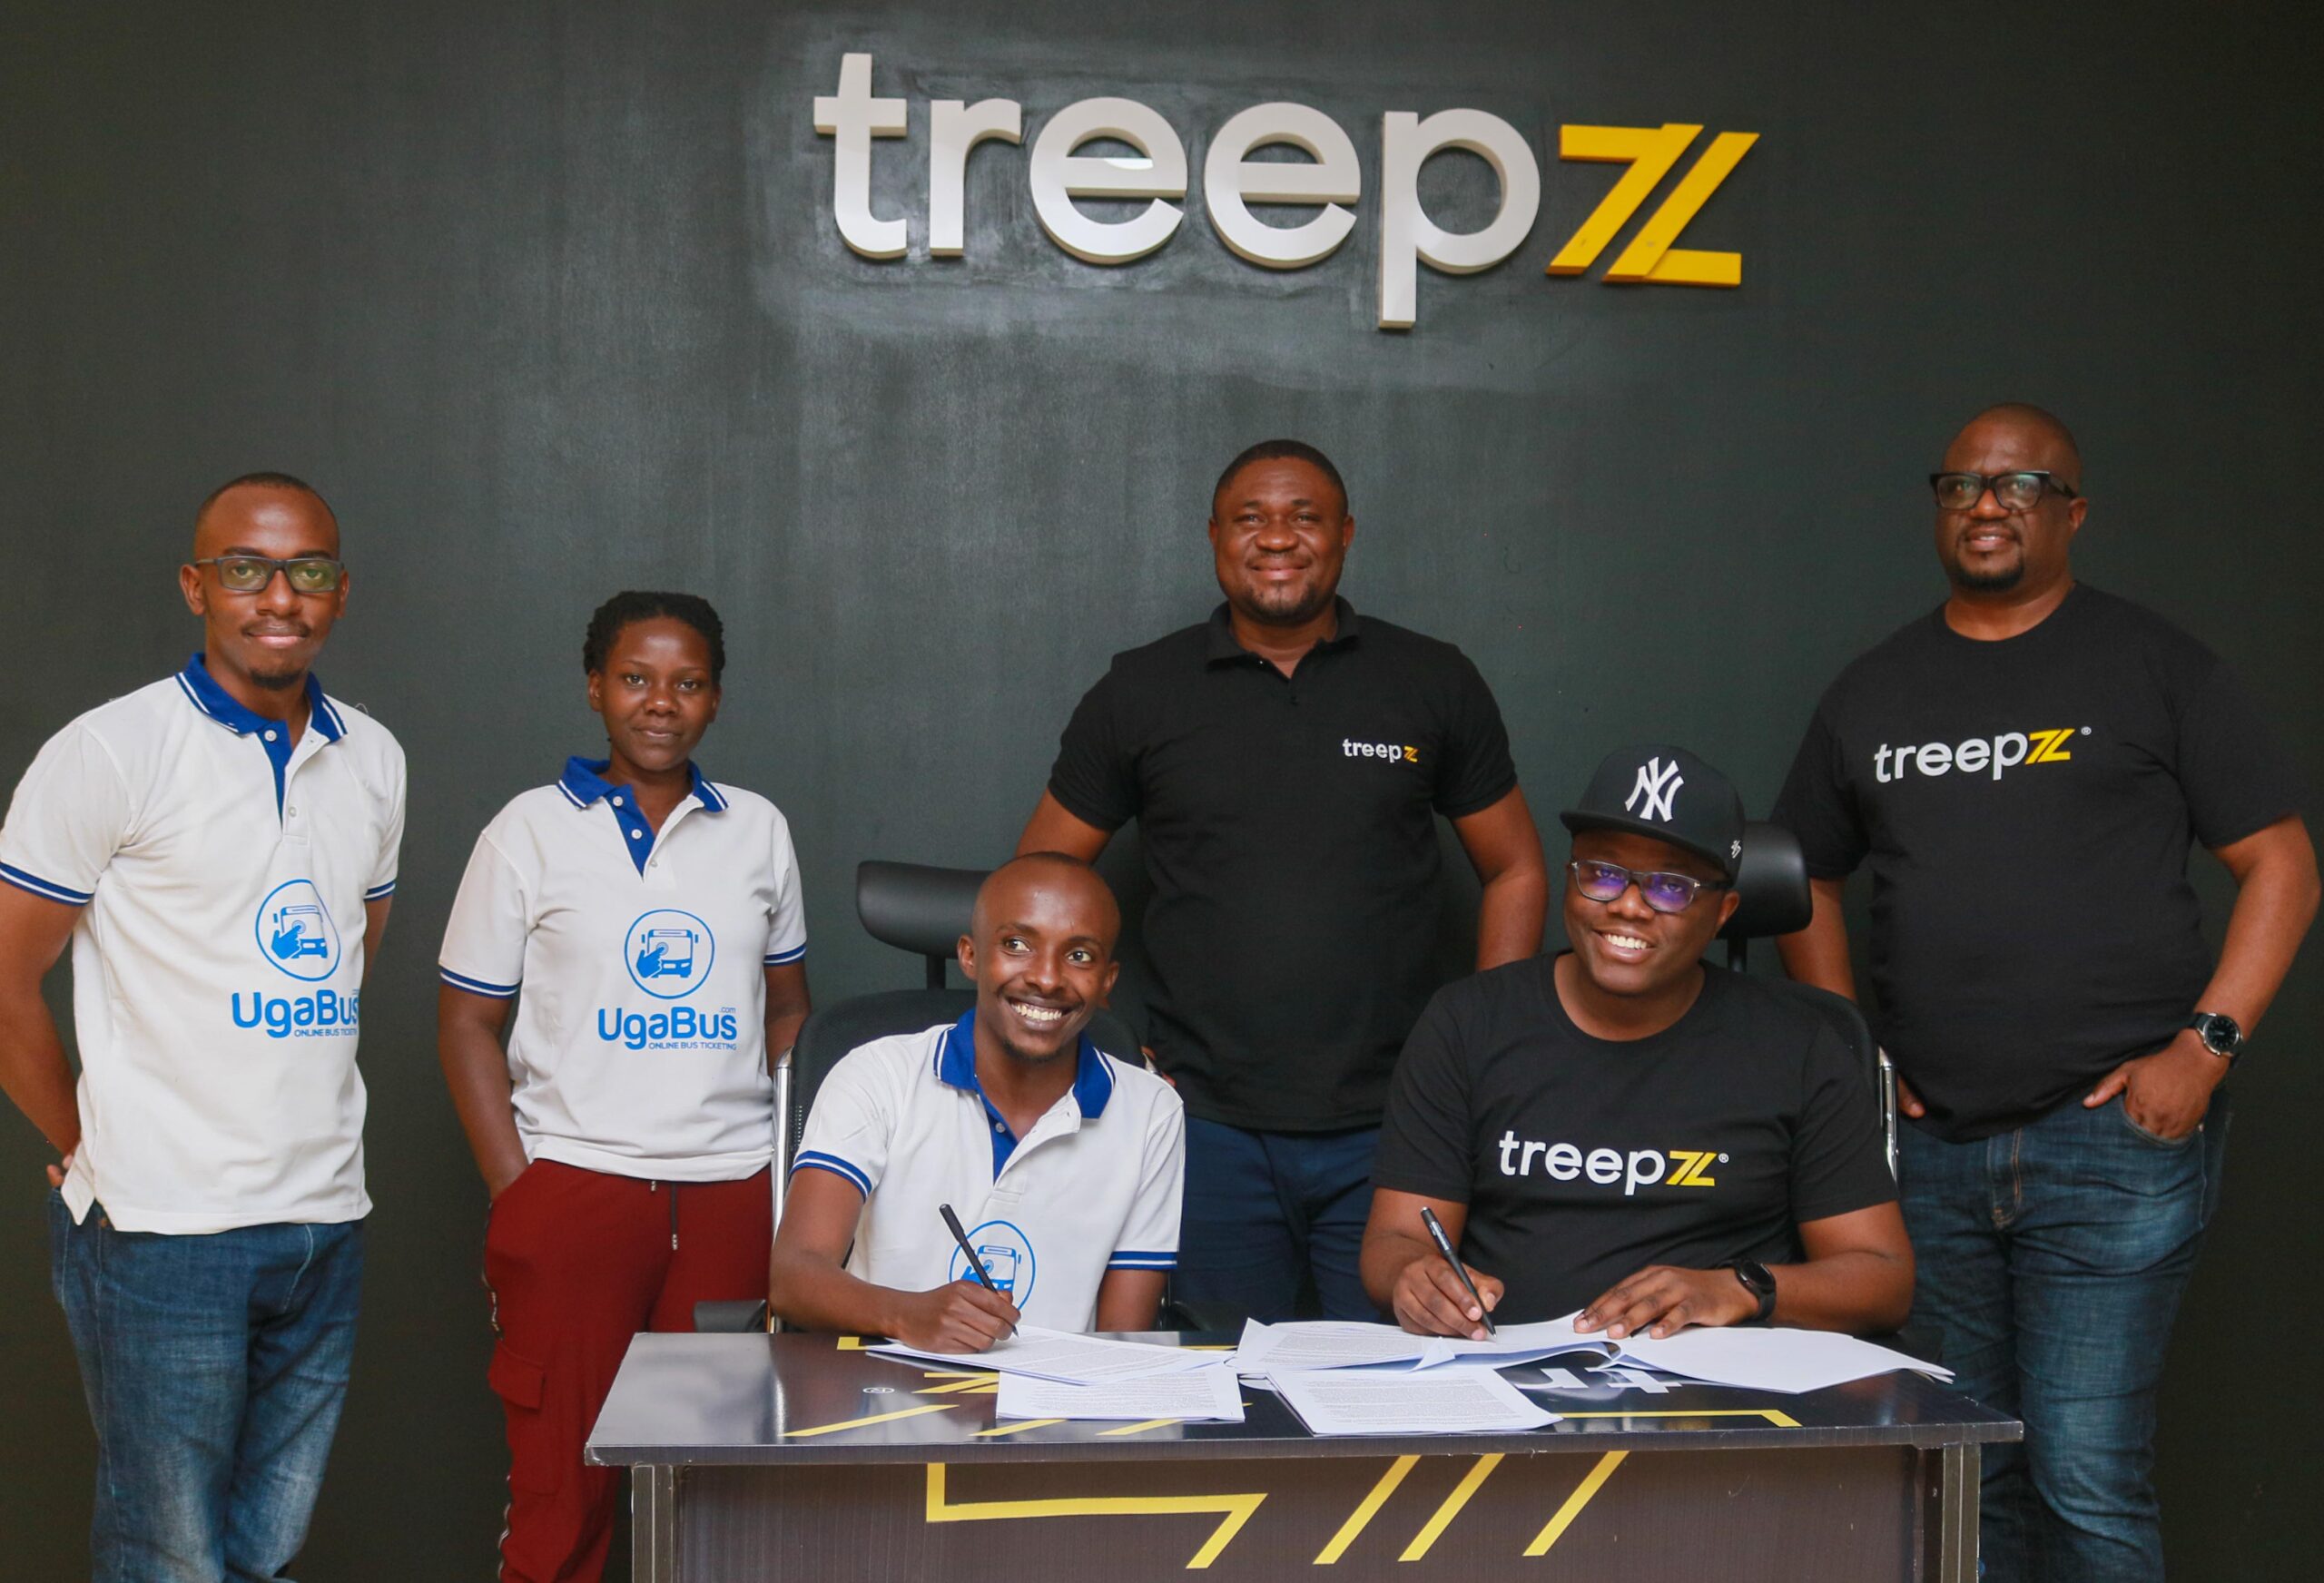 Treepz, A Nigerian MaaS Firm Raises $2.8M In A Seed Round To Fund East African Expansion